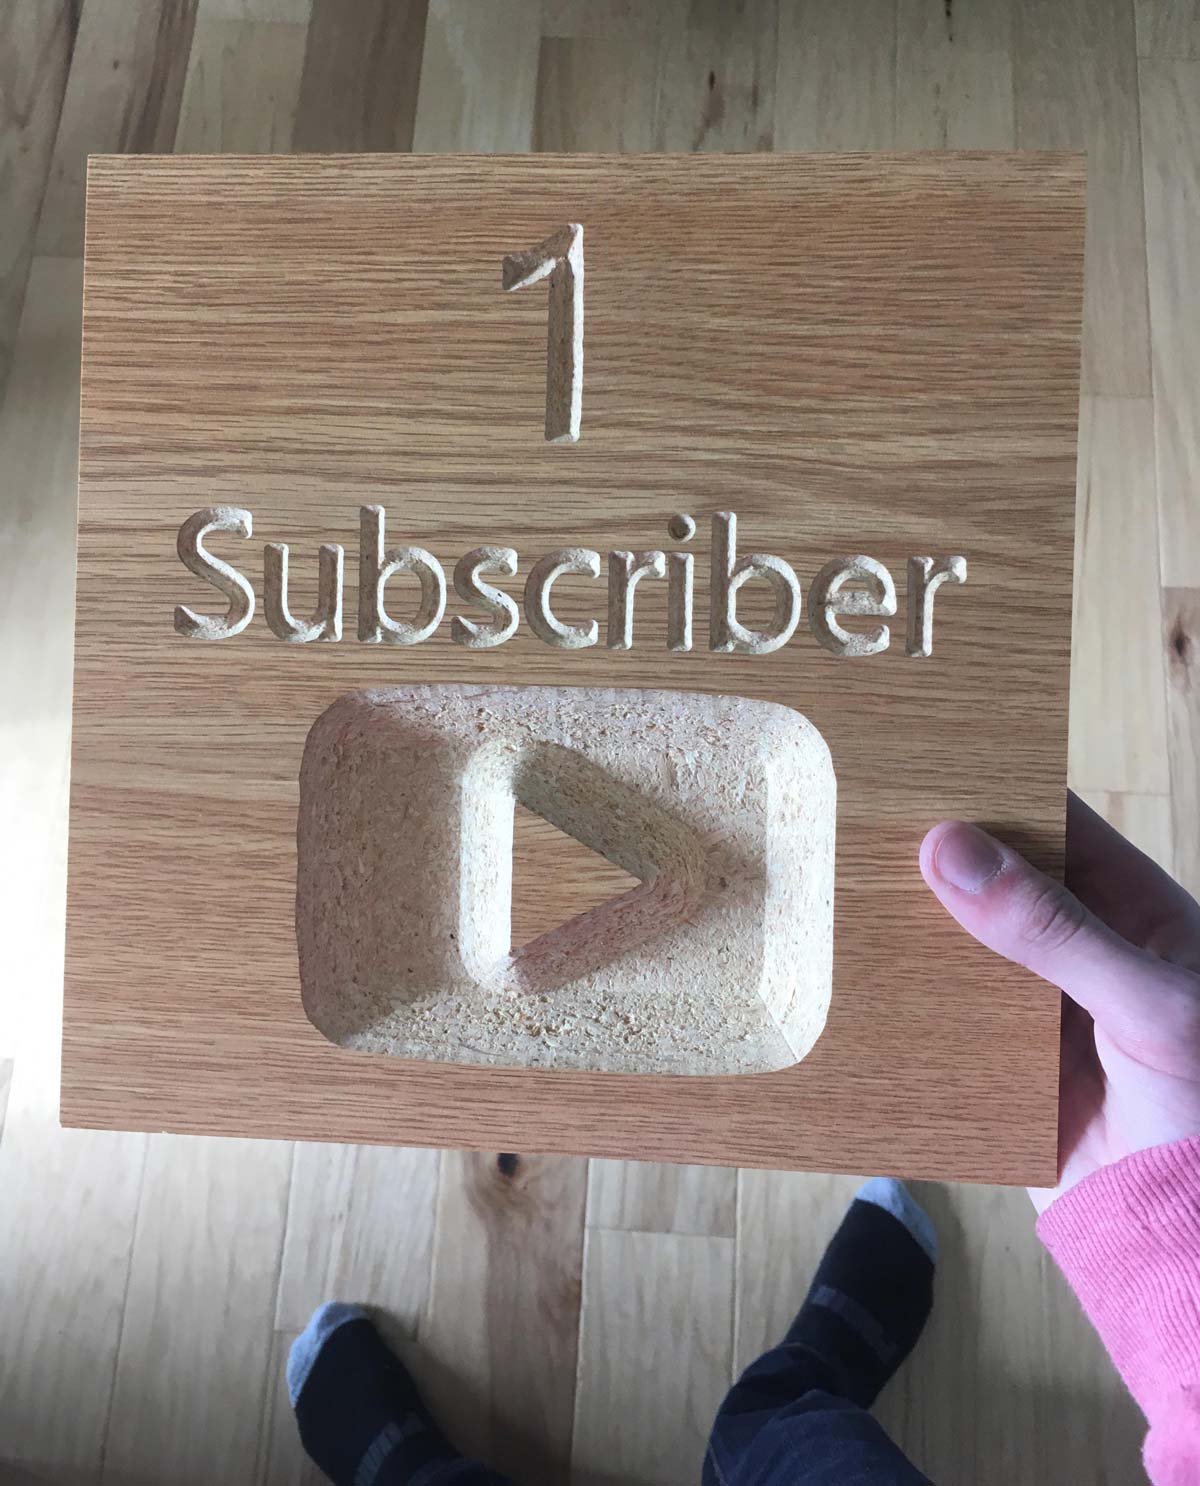 Got my wood play button in the mail today!